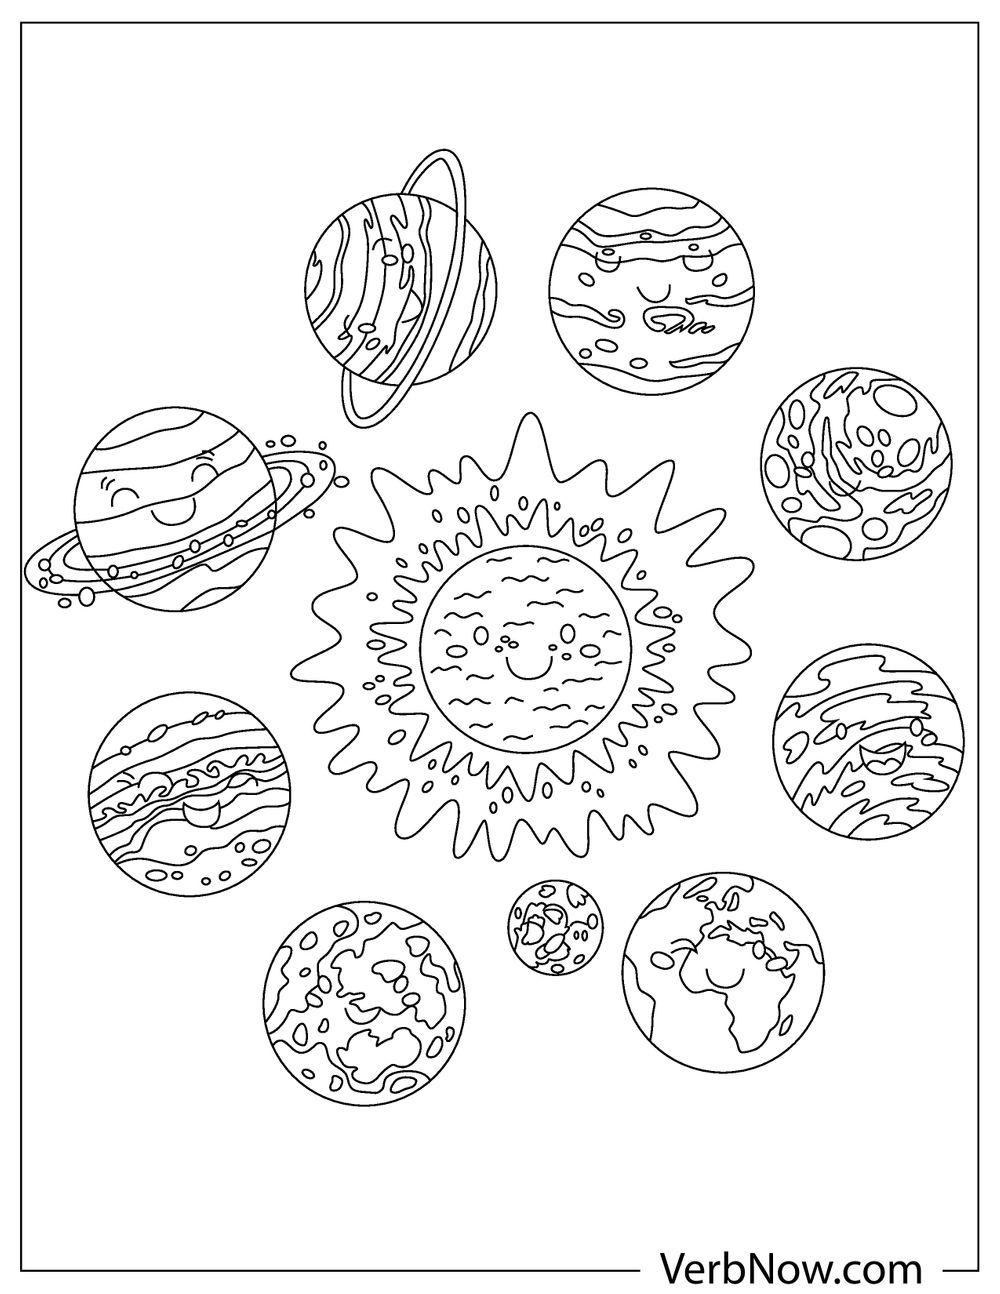 Free SOLAR SYSTEM Coloring Pages & Book for Download (Printable PDF) -  VerbNow